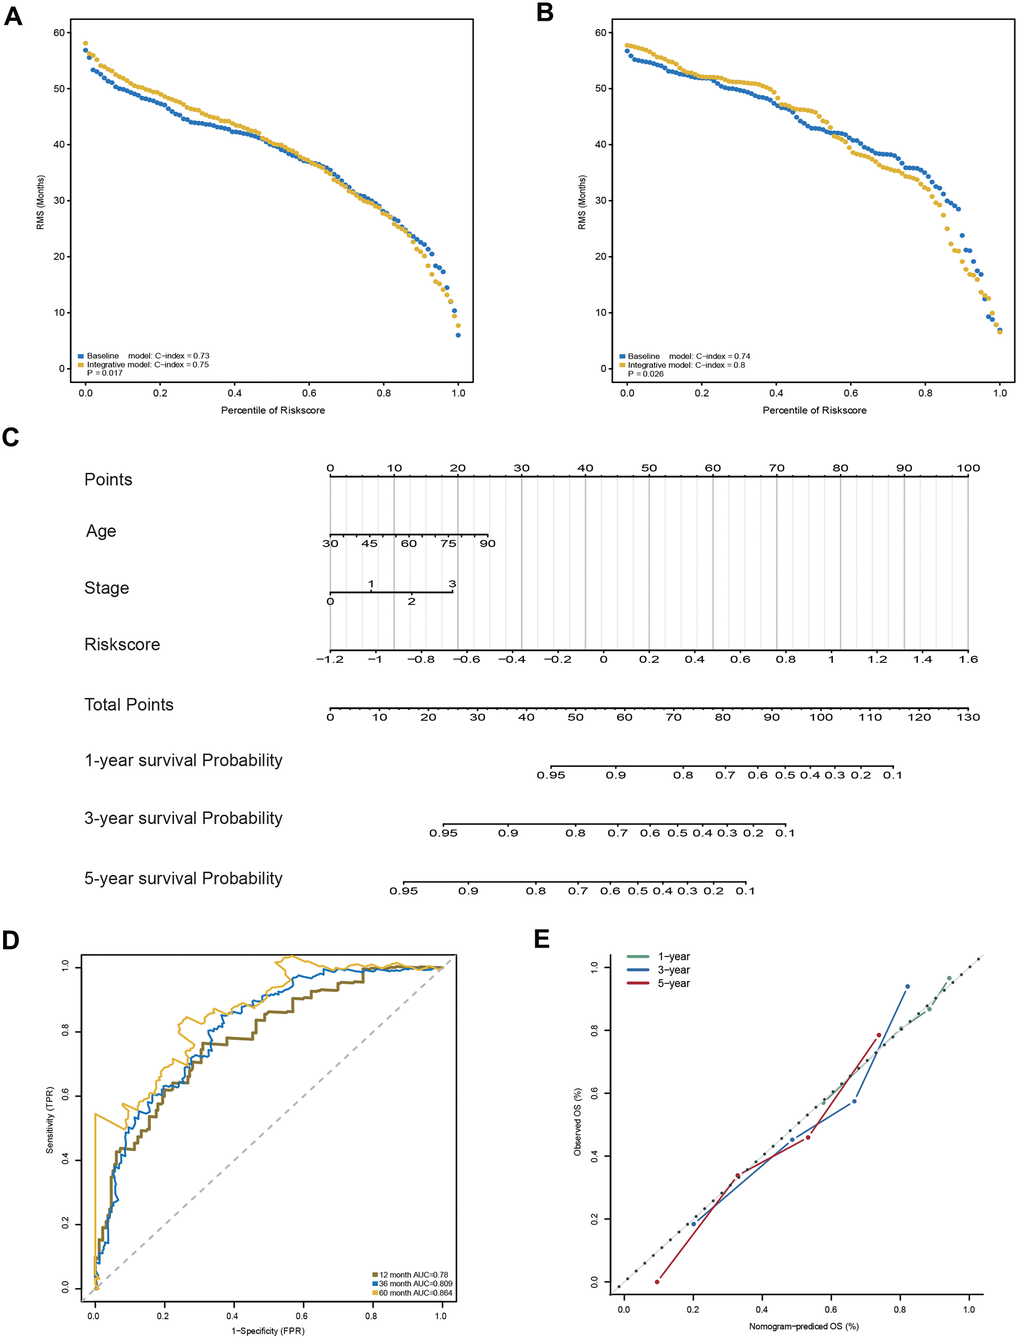 Construction and evaluation of the AS-clinical nomogram for GC patients. (A, B) RMS curves for the 23-AS event prognostic signature and the AS-clinical signature in the training and validation datasets. P-values represent the difference between the two signatures in terms of the C-index. (C) Nomogram prediction of 1-year, 3-year, and 5-year OS. For stage, 0 means TNM stage I, 1 means TNM stage II, 2 means TNM stage III, and 3 means TNM stage IV. (D) Time-dependent ROC curves for the nomogram at different time points. (E) Calibration curves of observed and predicted probabilities for the nomogram.